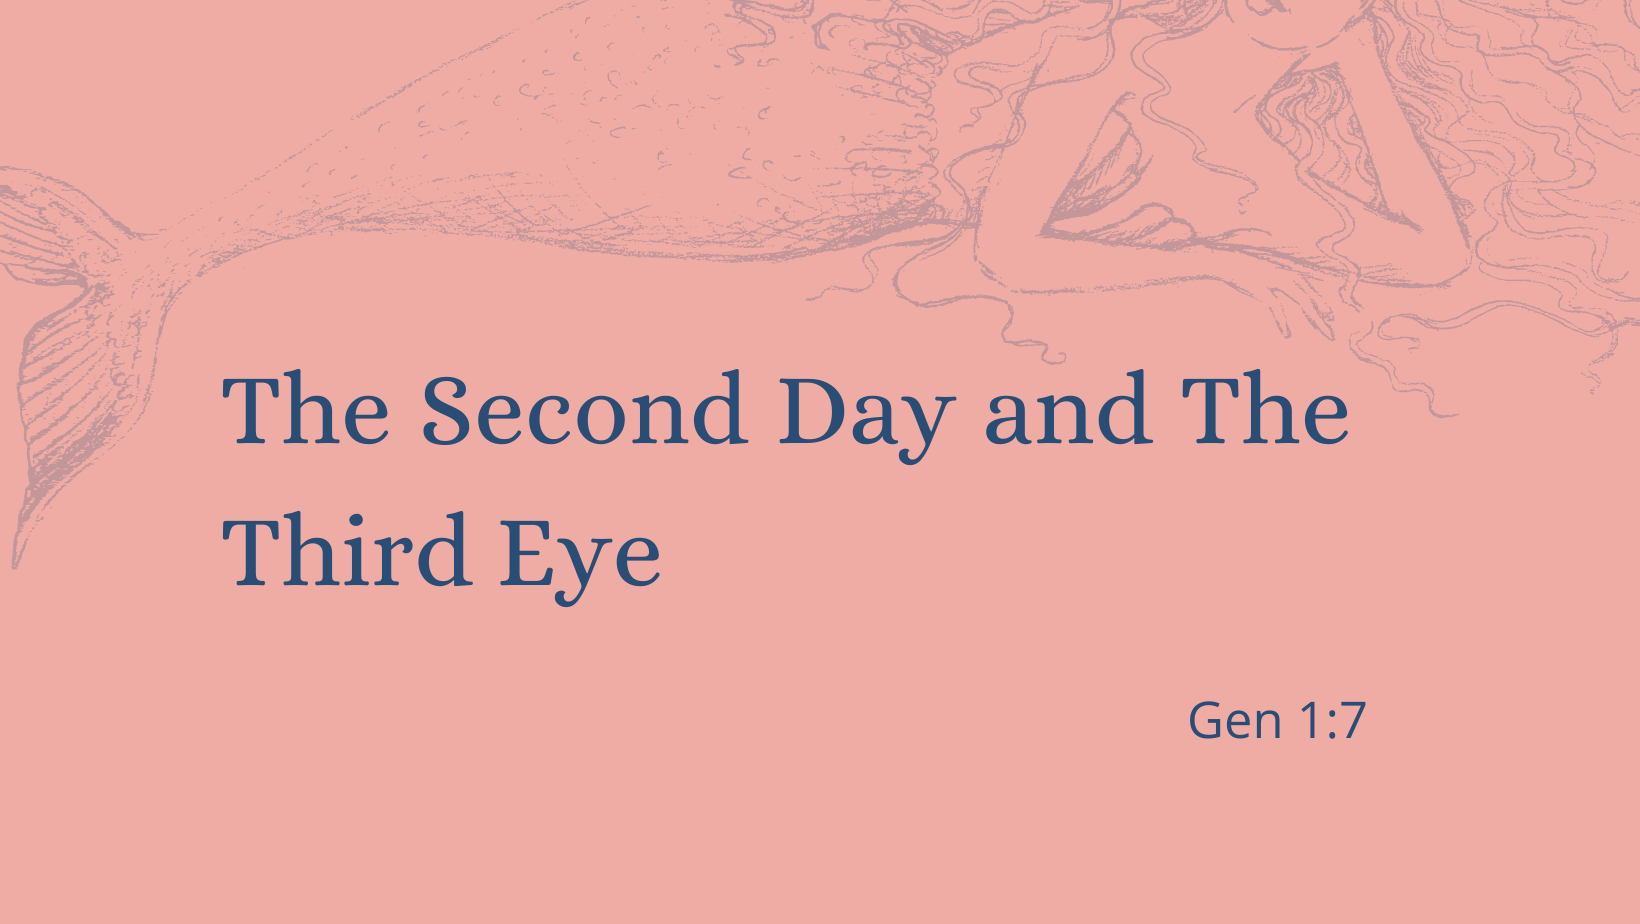 The Second Day and Third Eye